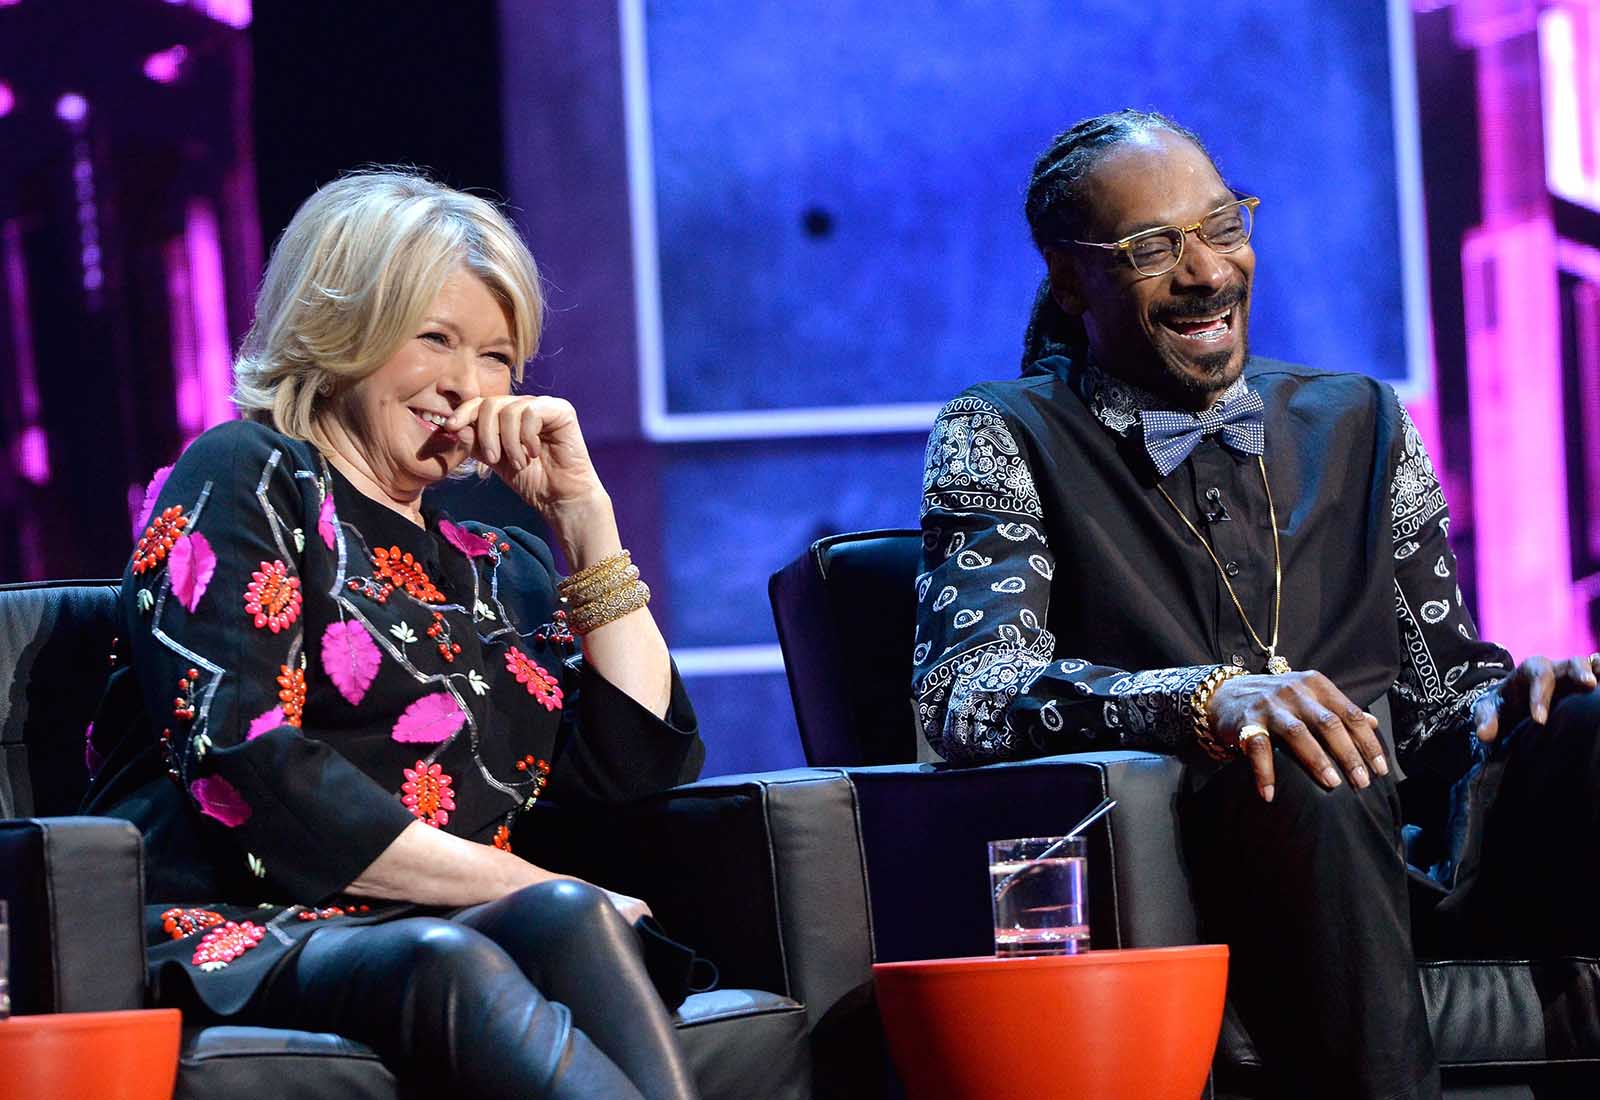 Snoop Dogg and Martha Stewart seem like a completely unlikely duo, yet the two have been friends for over ten years. How did they meet in the first place?